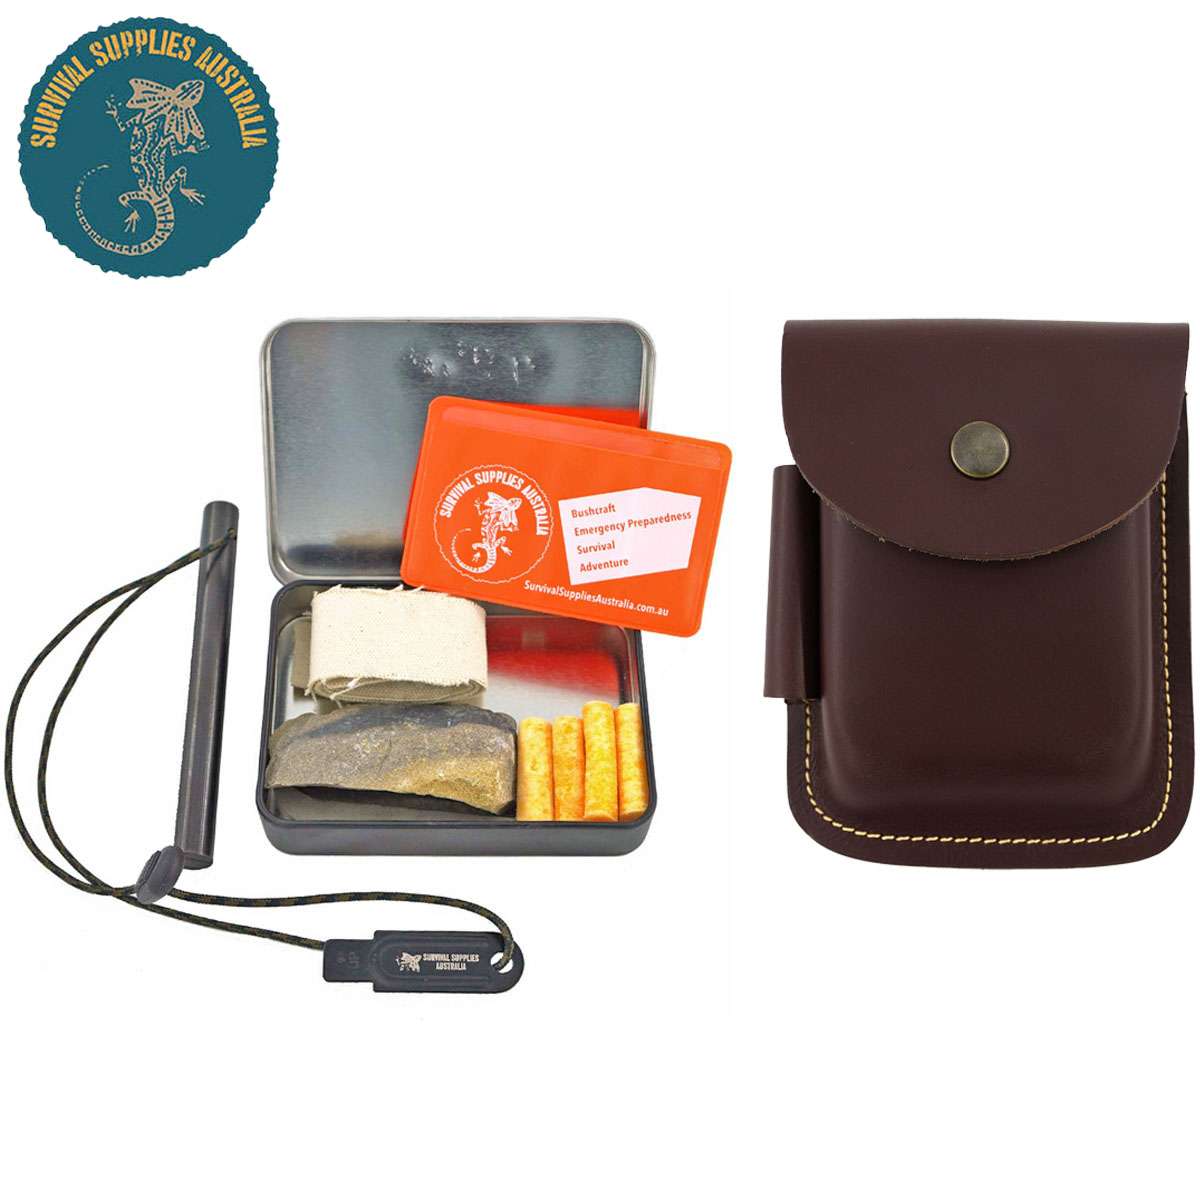 SSA Complete Fire Kit Limited Edition